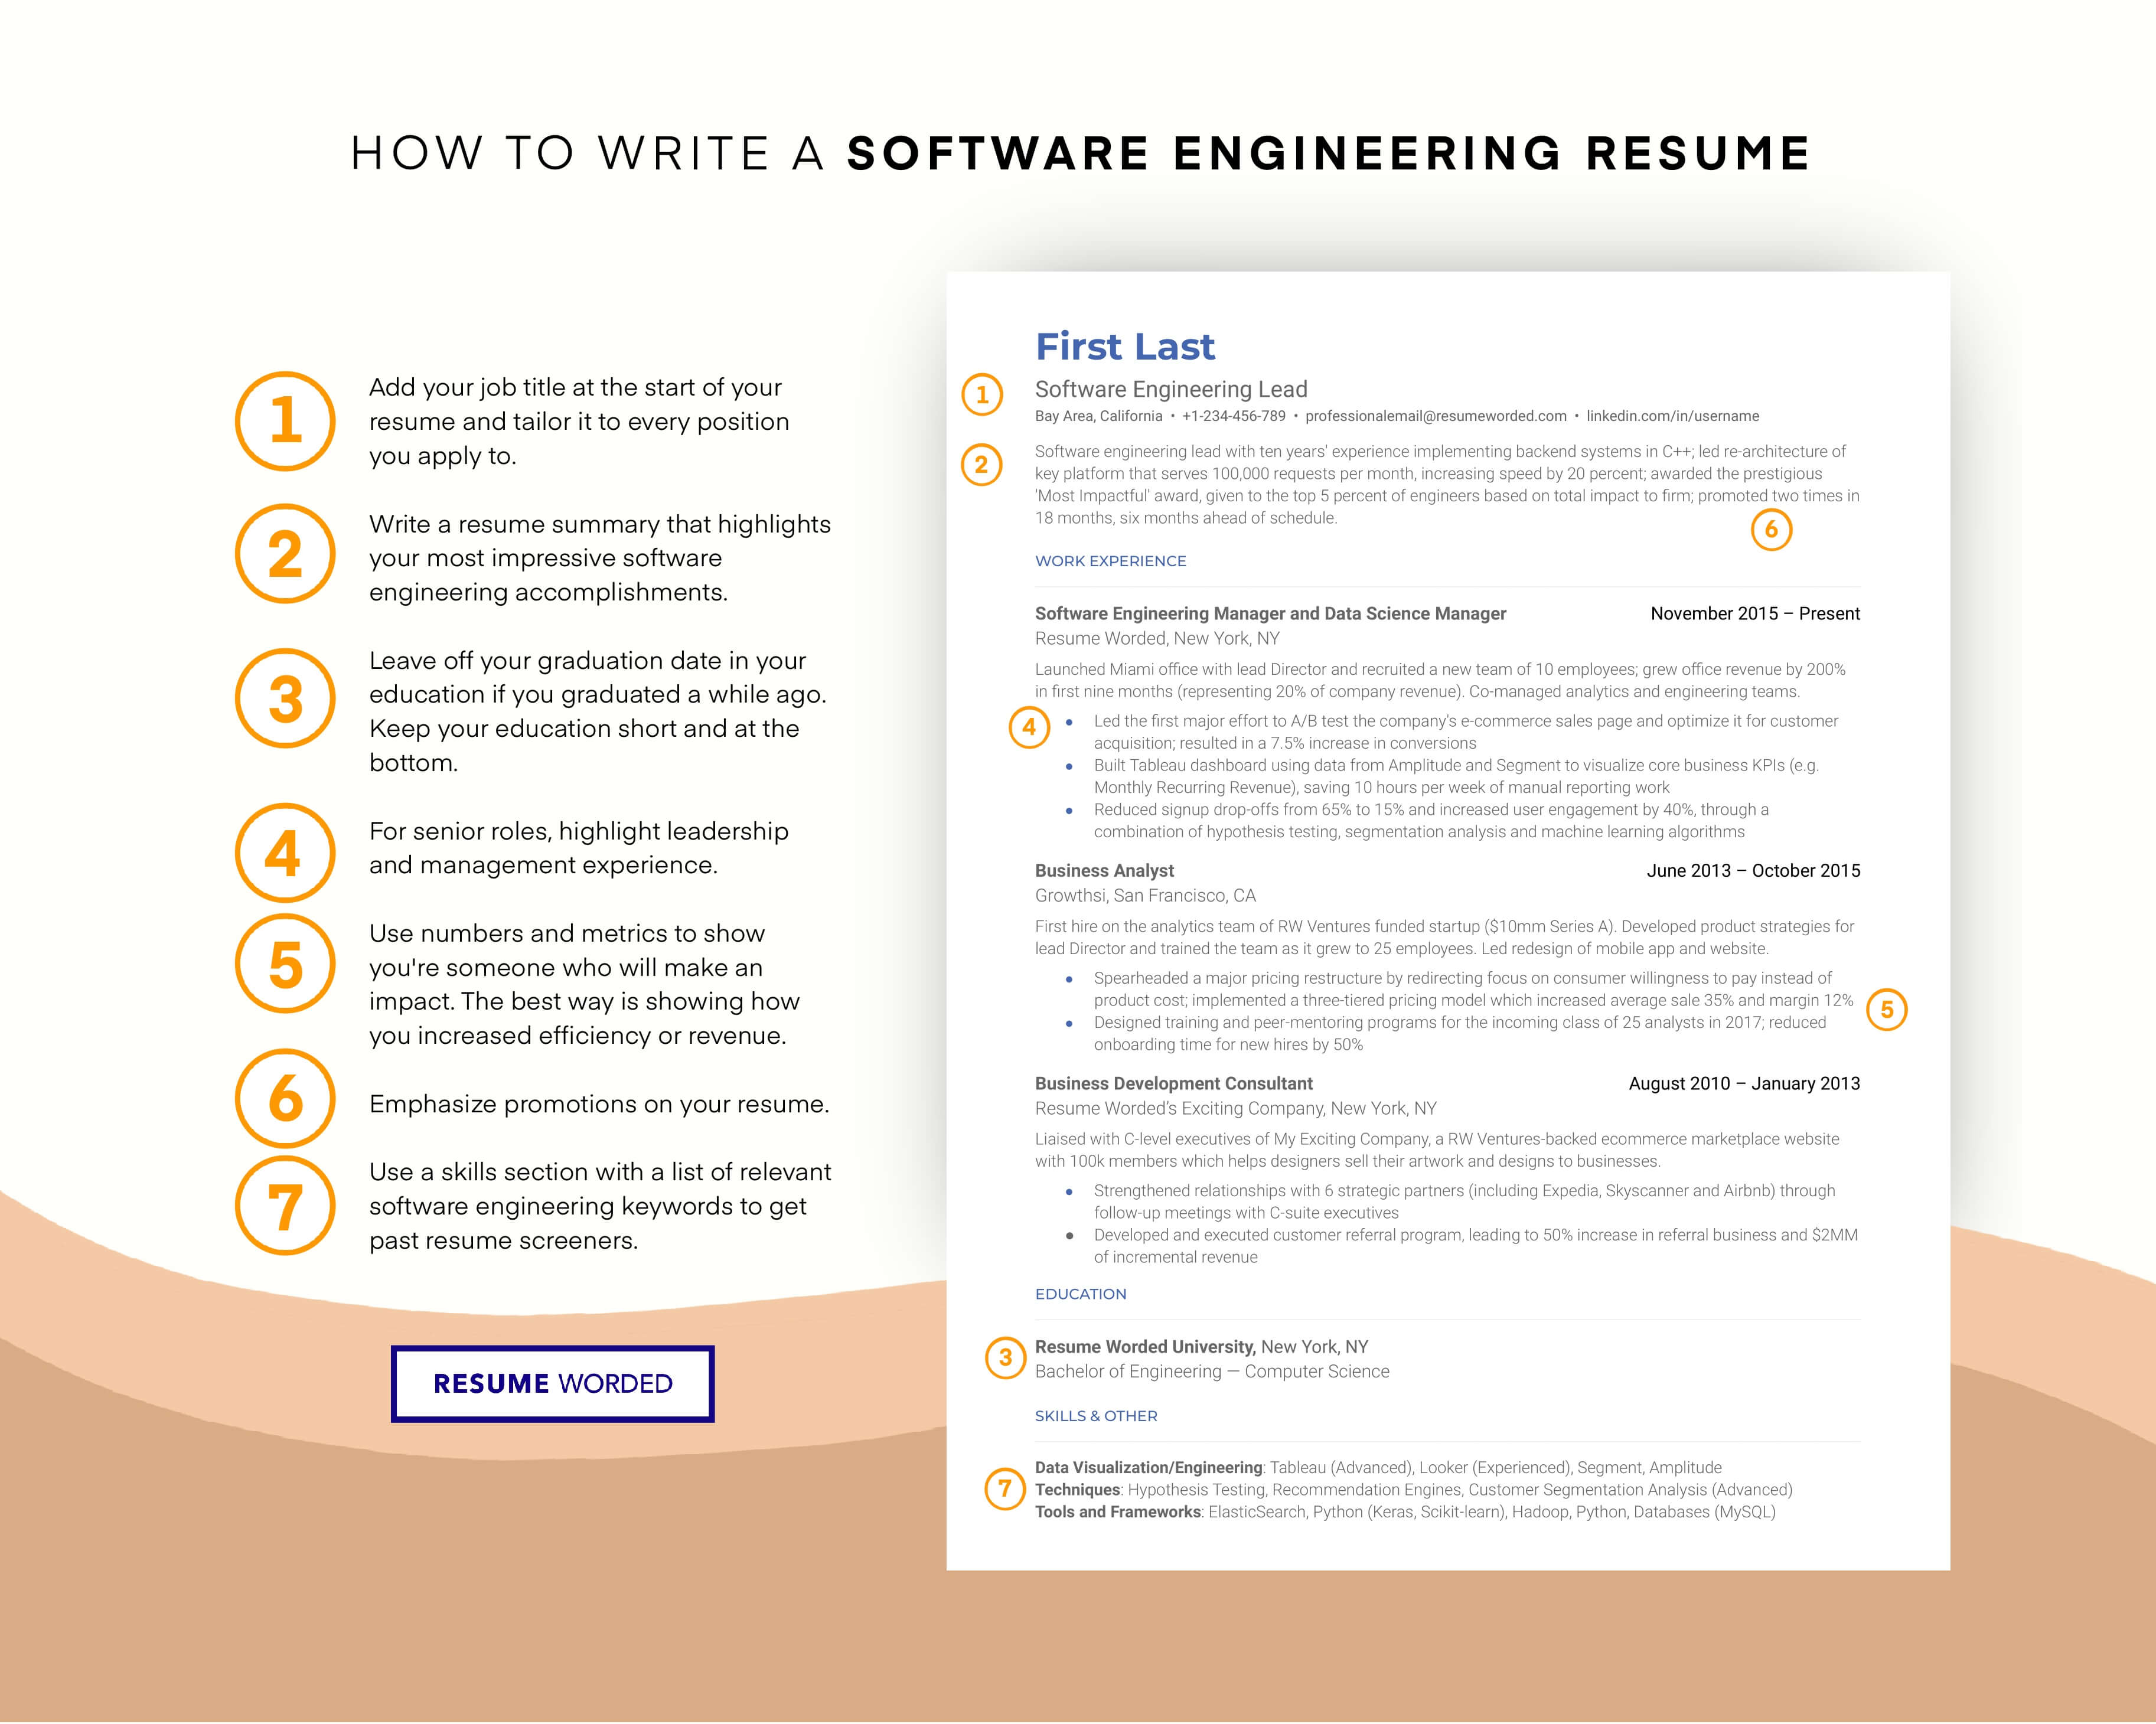 Indicate your programming skills. - AWS Solutions Architect Resume